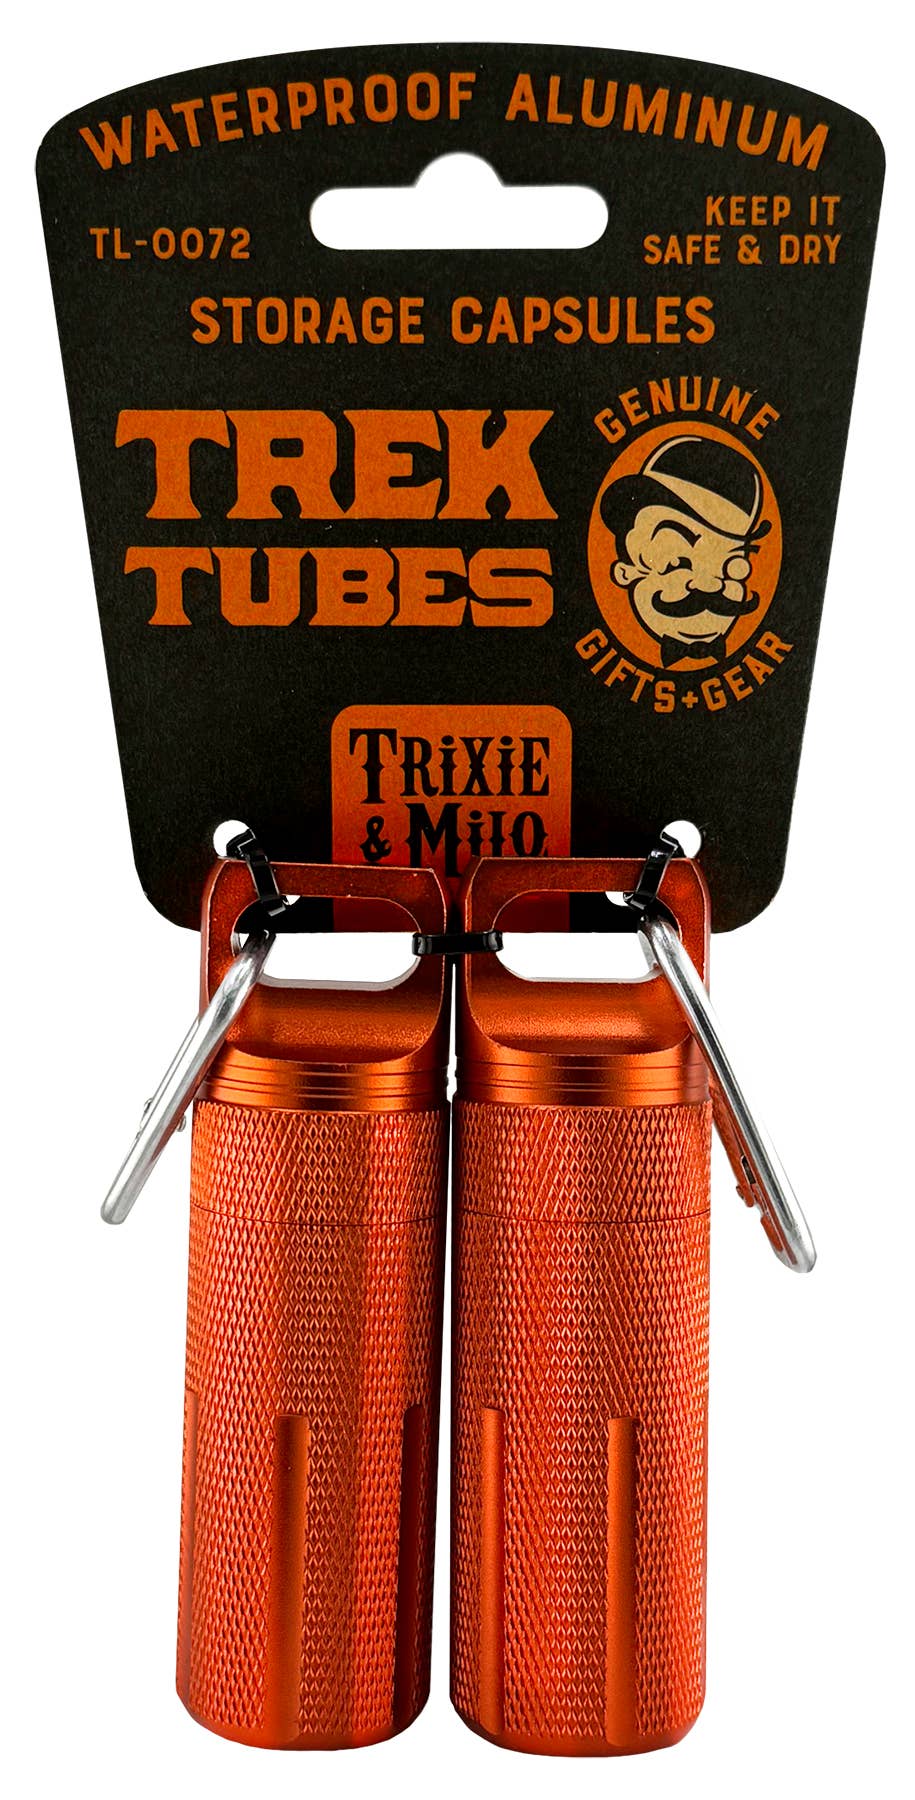 Two orange aluminum Trek Tubes (Set of 2) Waterproof Aluminum Containers with carabiners attached to a black card labeled "Trek Tubes by Trixie & Milo - waterproof aluminum storage containers.